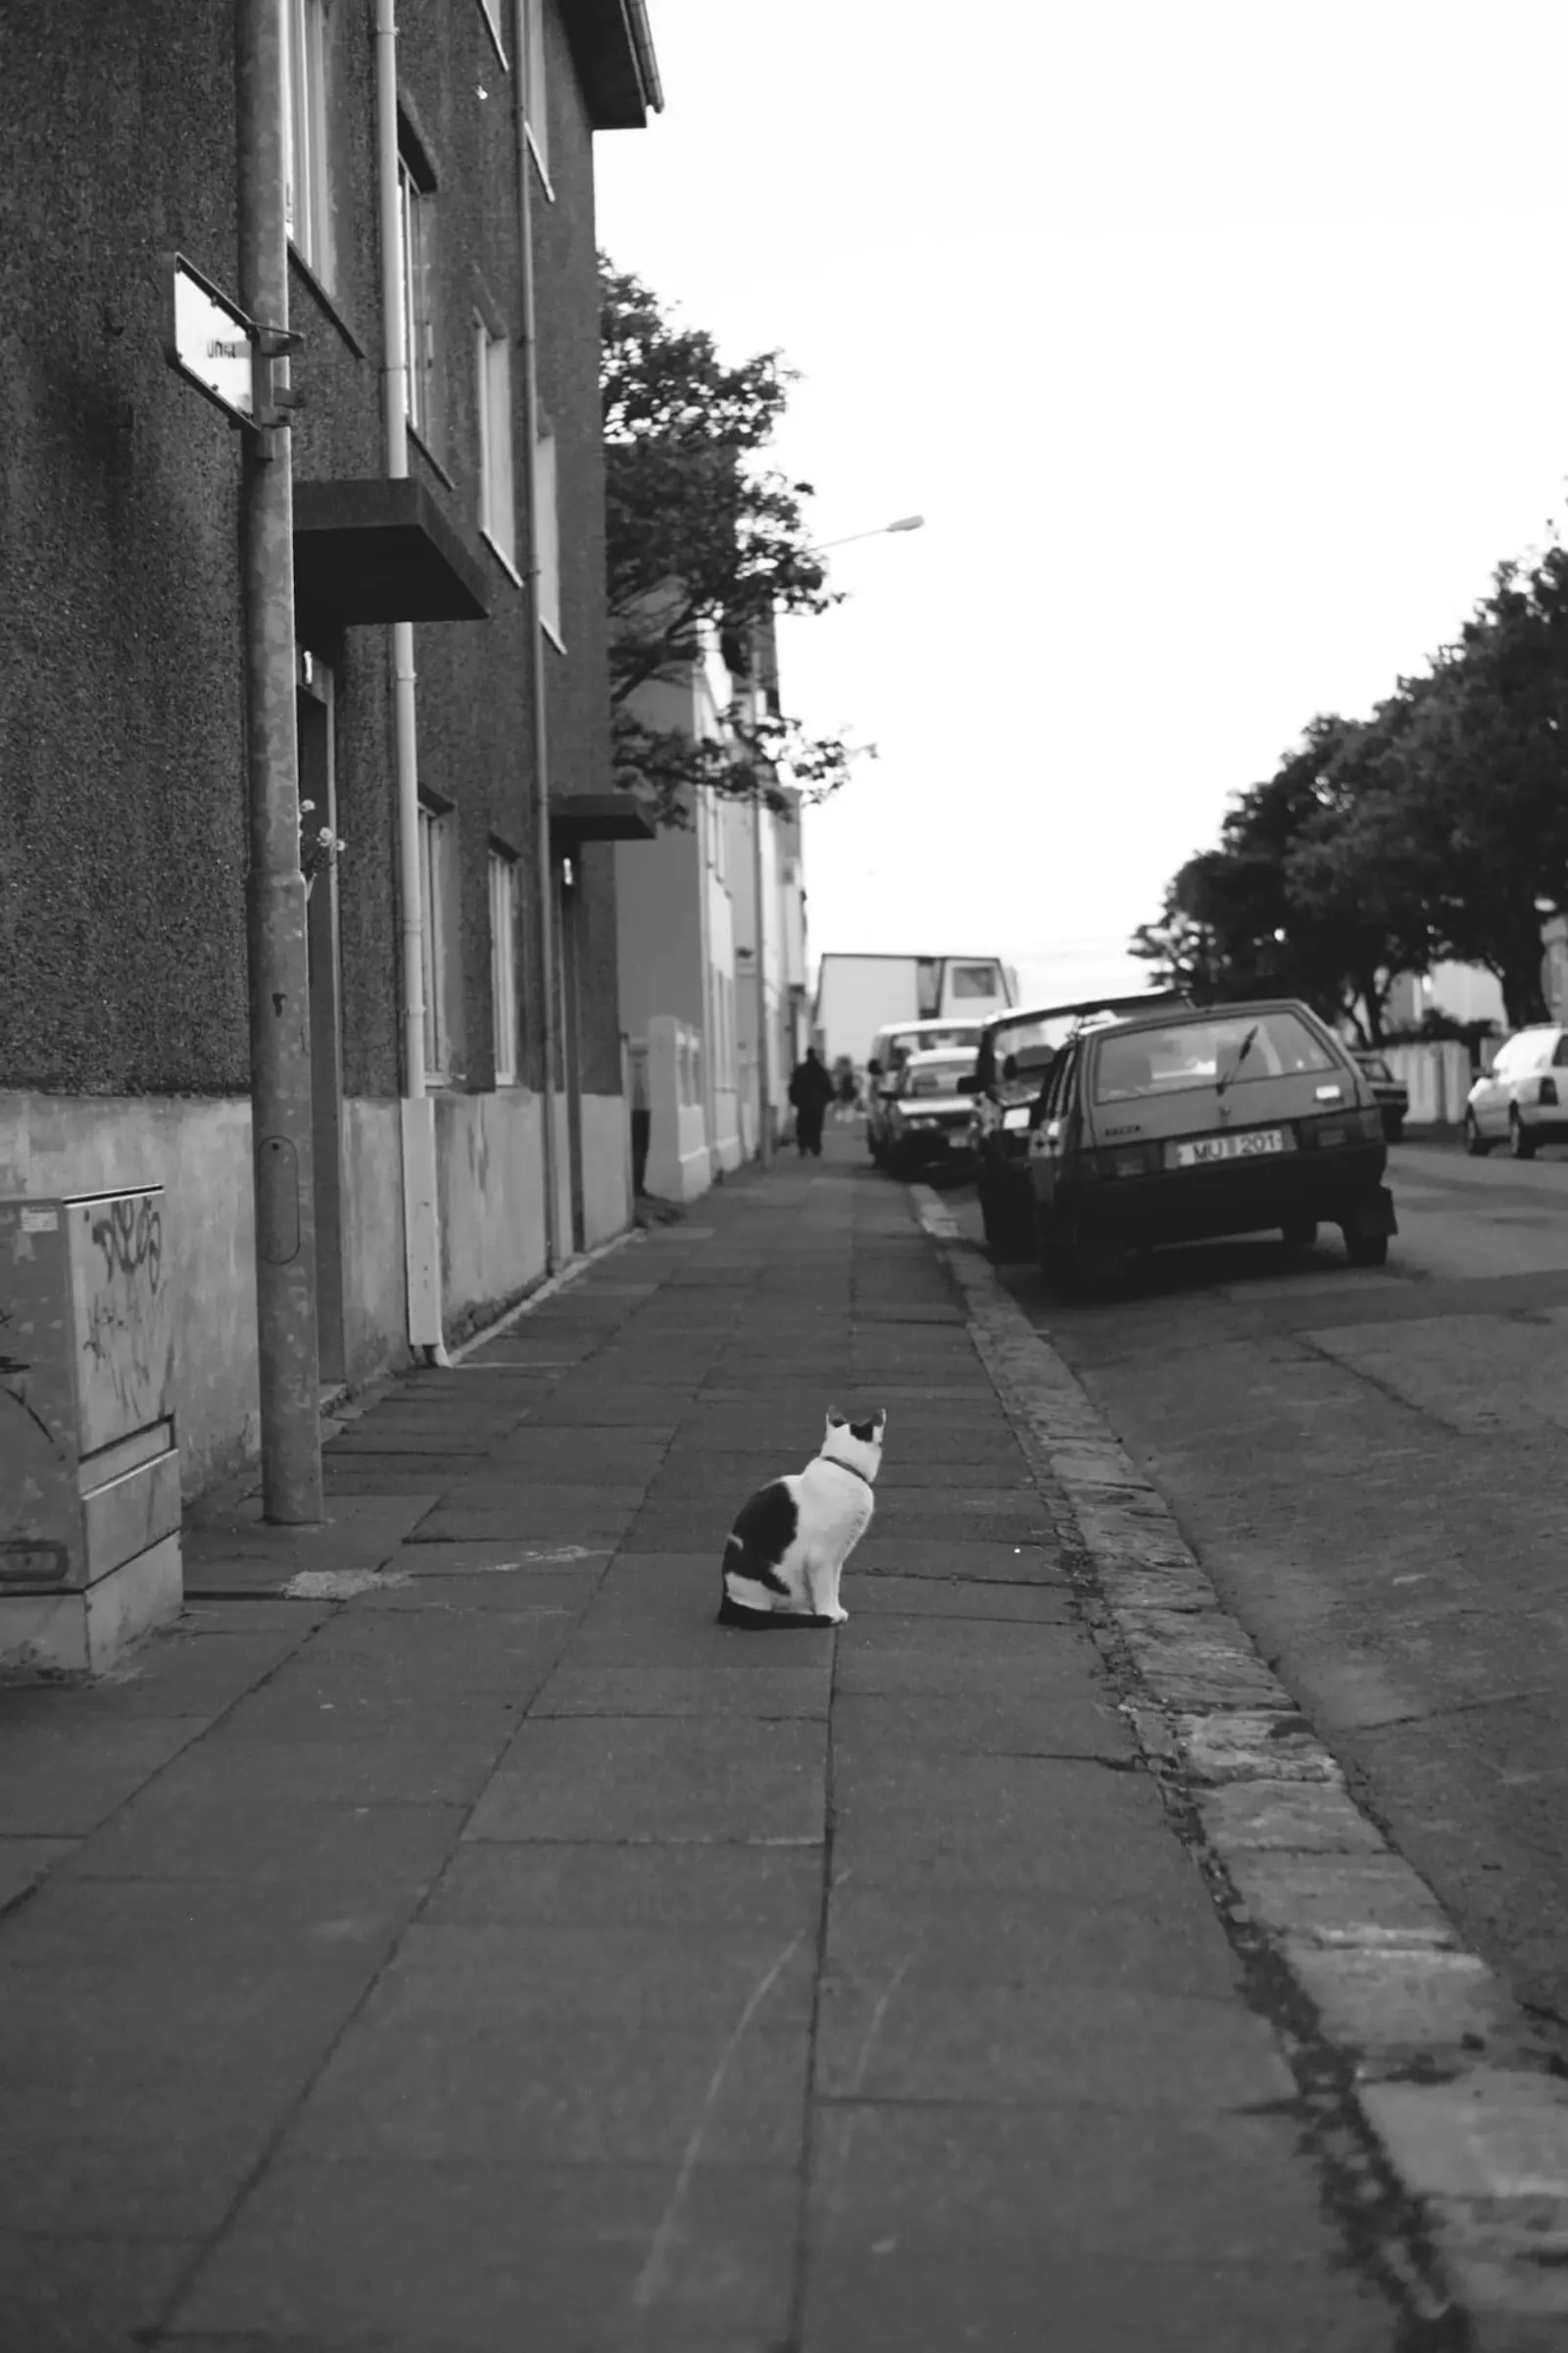 A cat looks down the street.